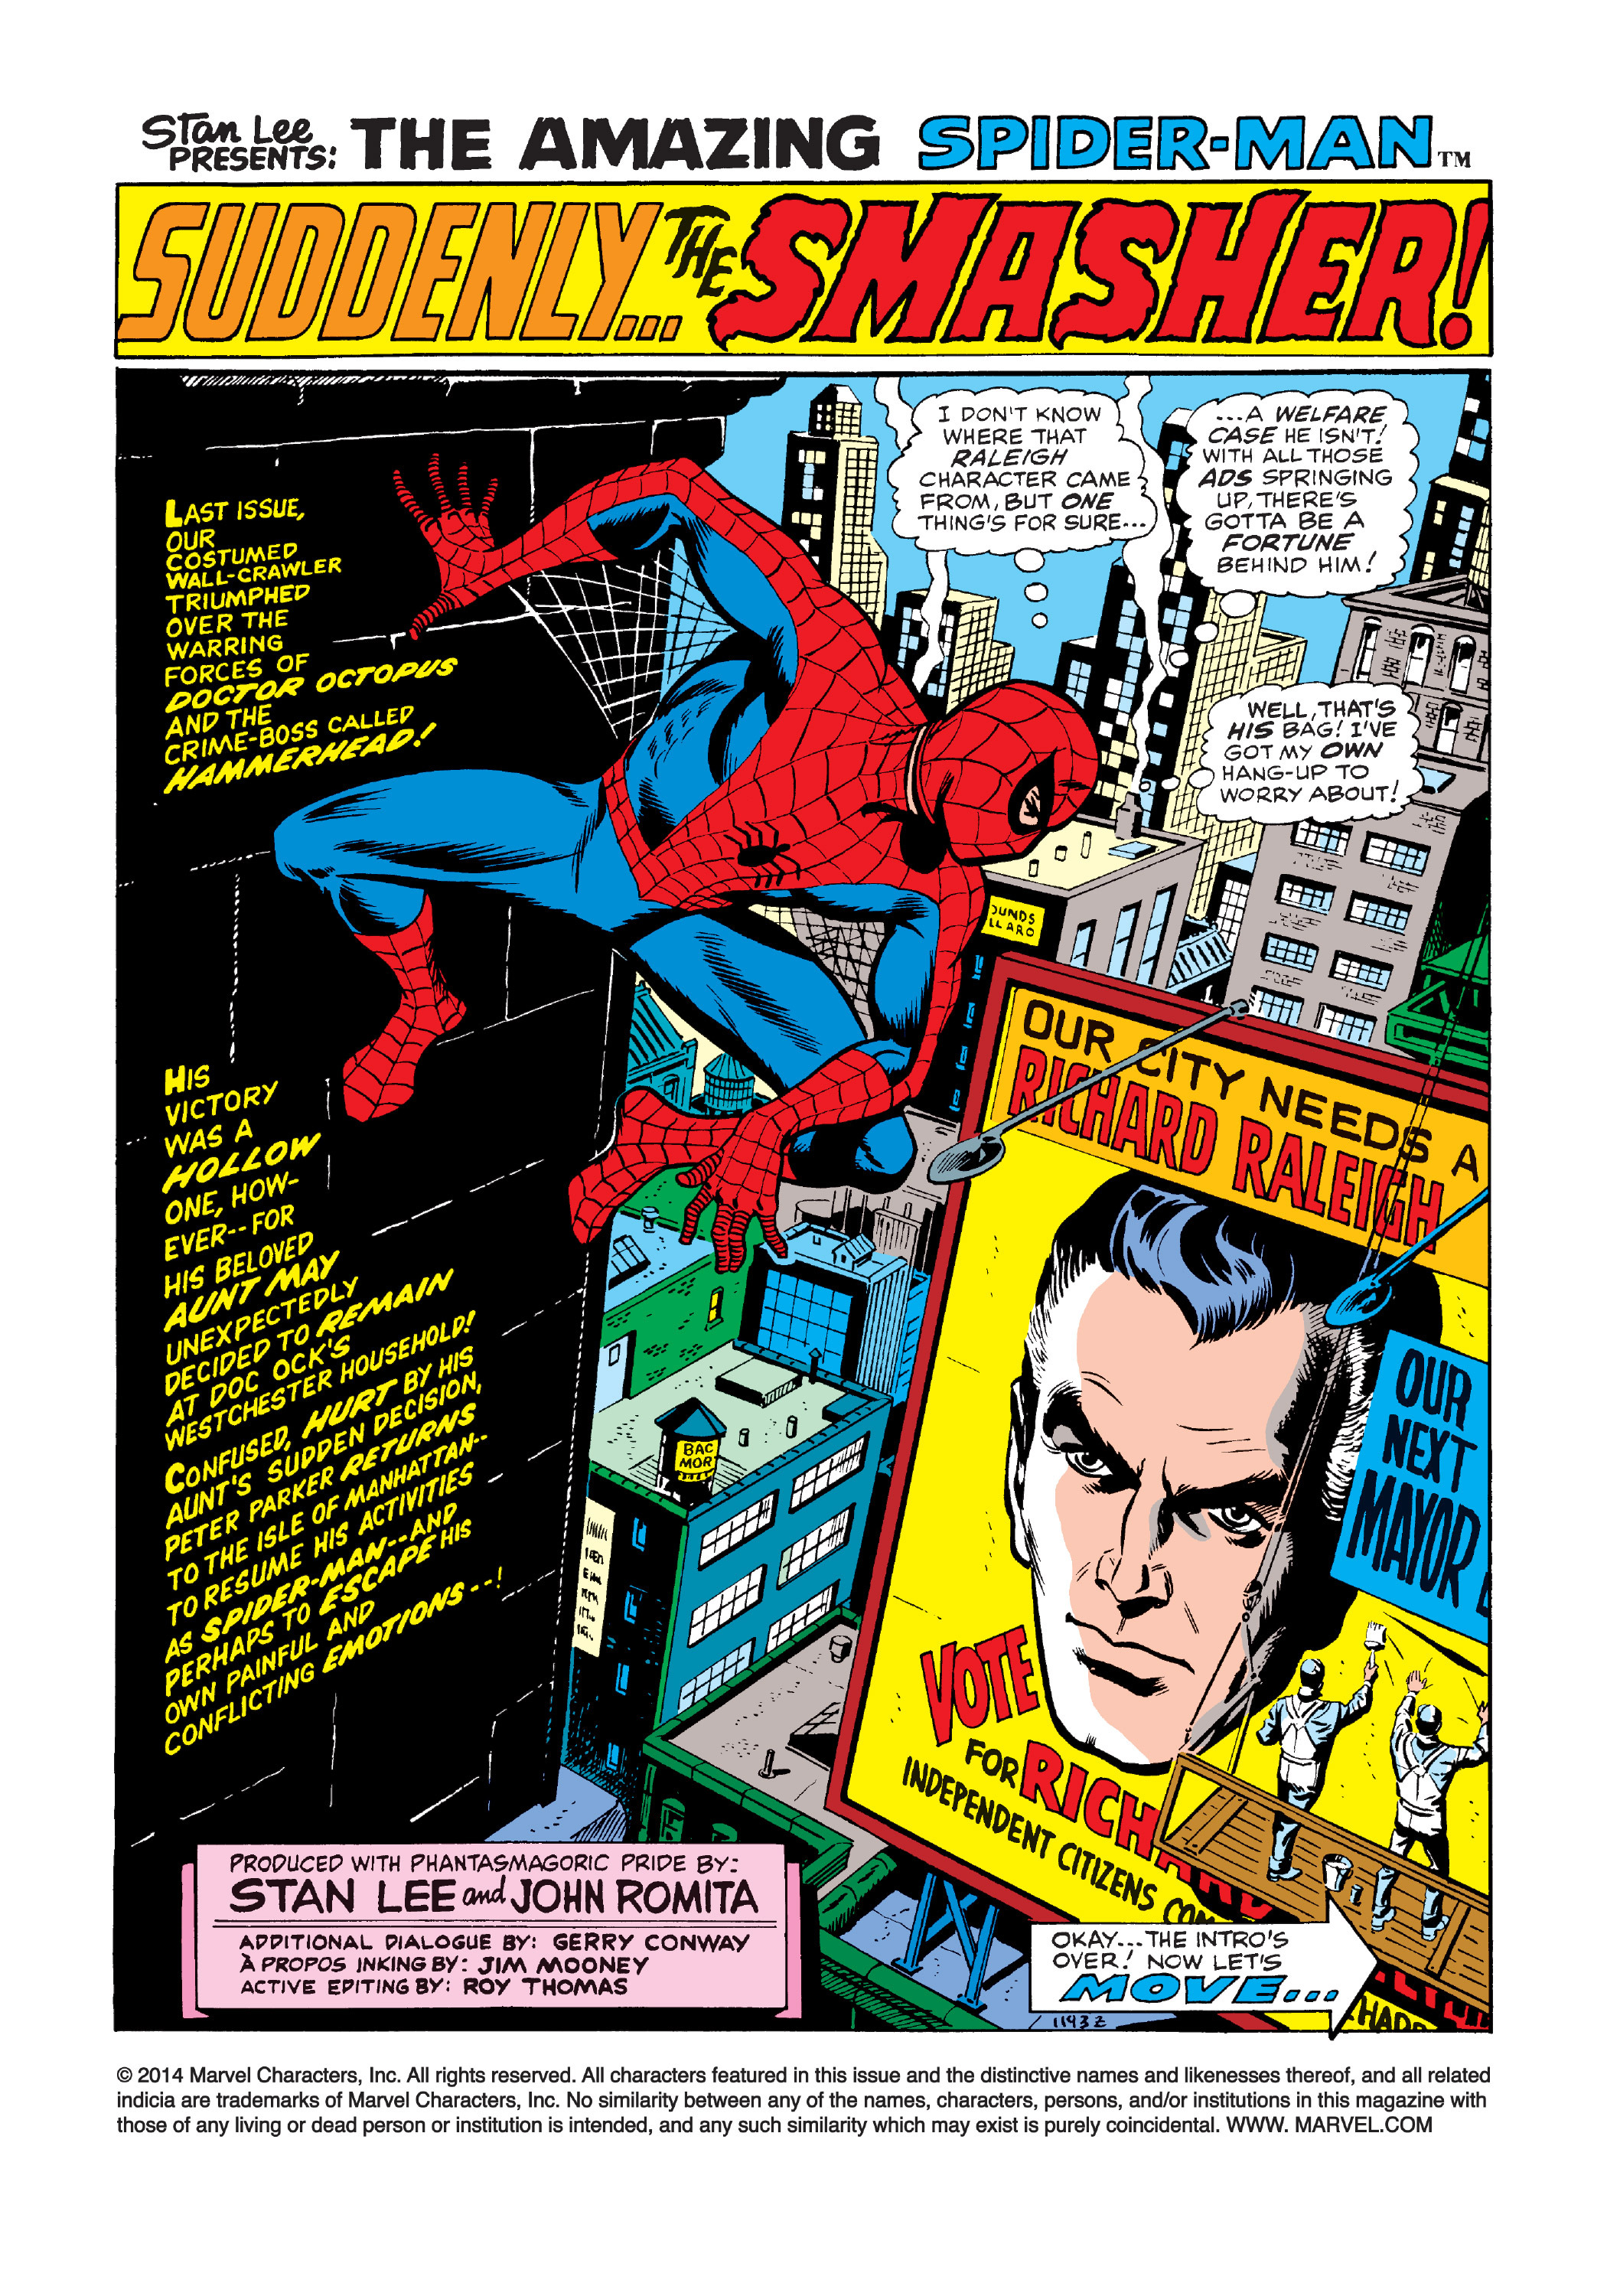 The Amazing Spider-Man (1963) 116 Page 1